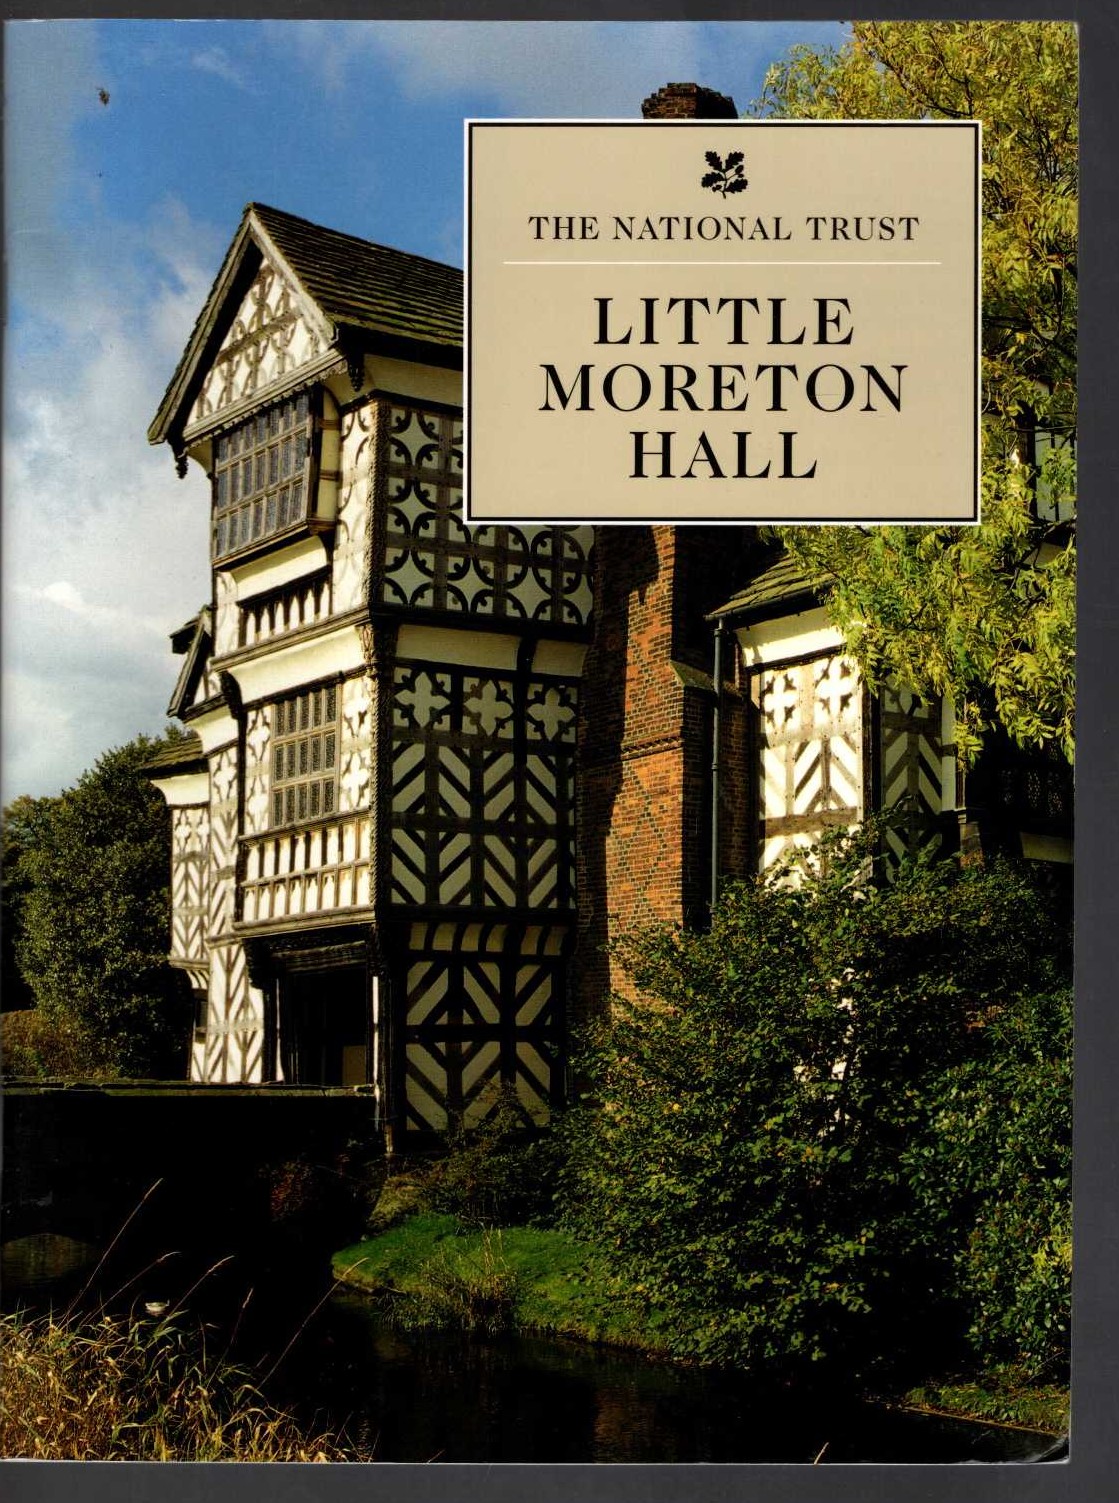 \ LITTLE MORETON HALL by The National Trust front book cover image